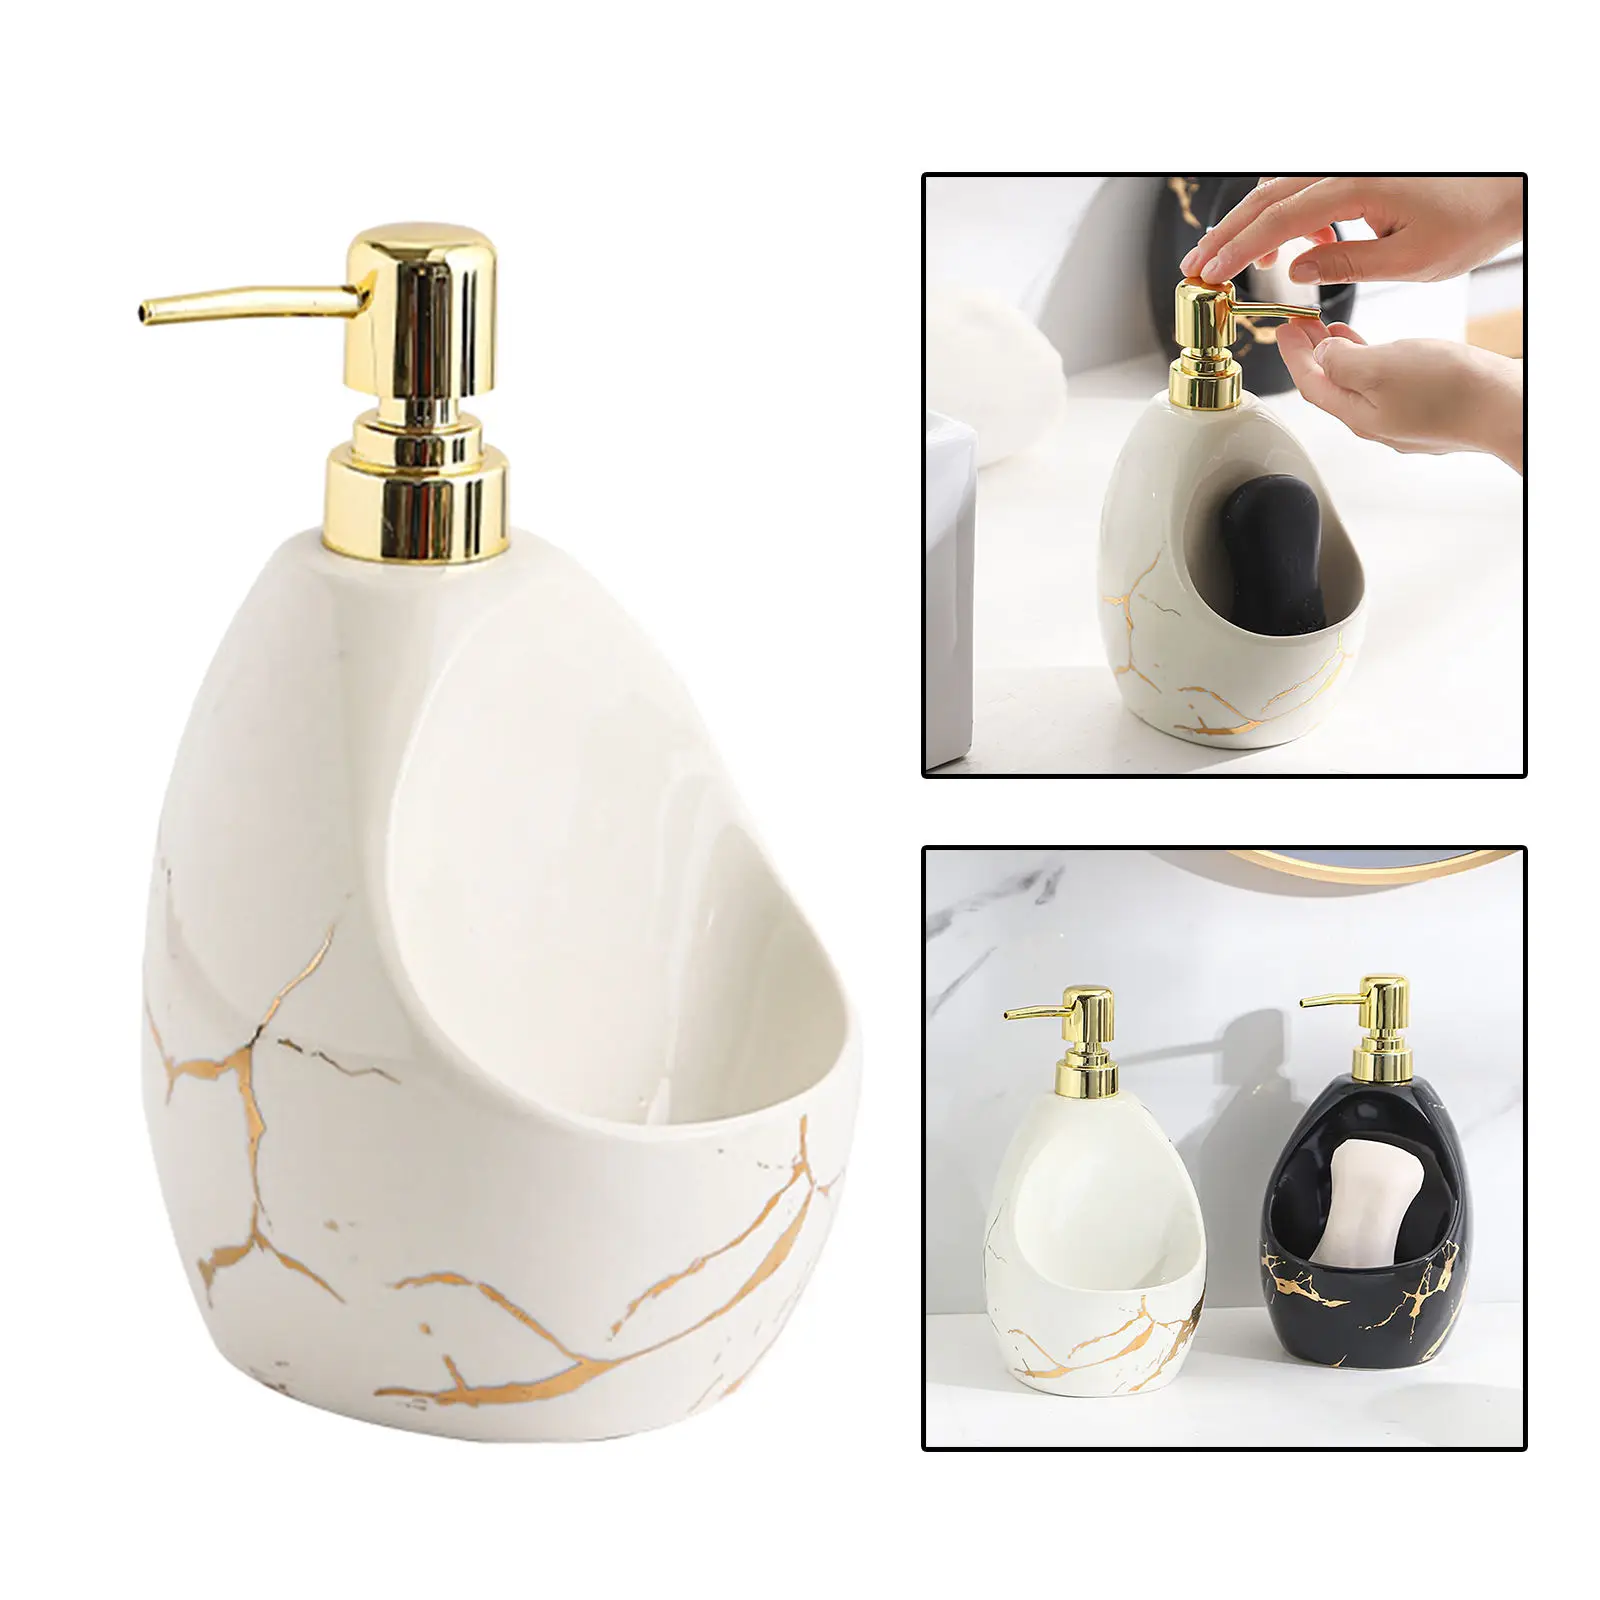 Soap Dispenser with Sponge Holder Ceramic Marble Look 2 in 1 Modern Caddy Organizer for Countertop Kids